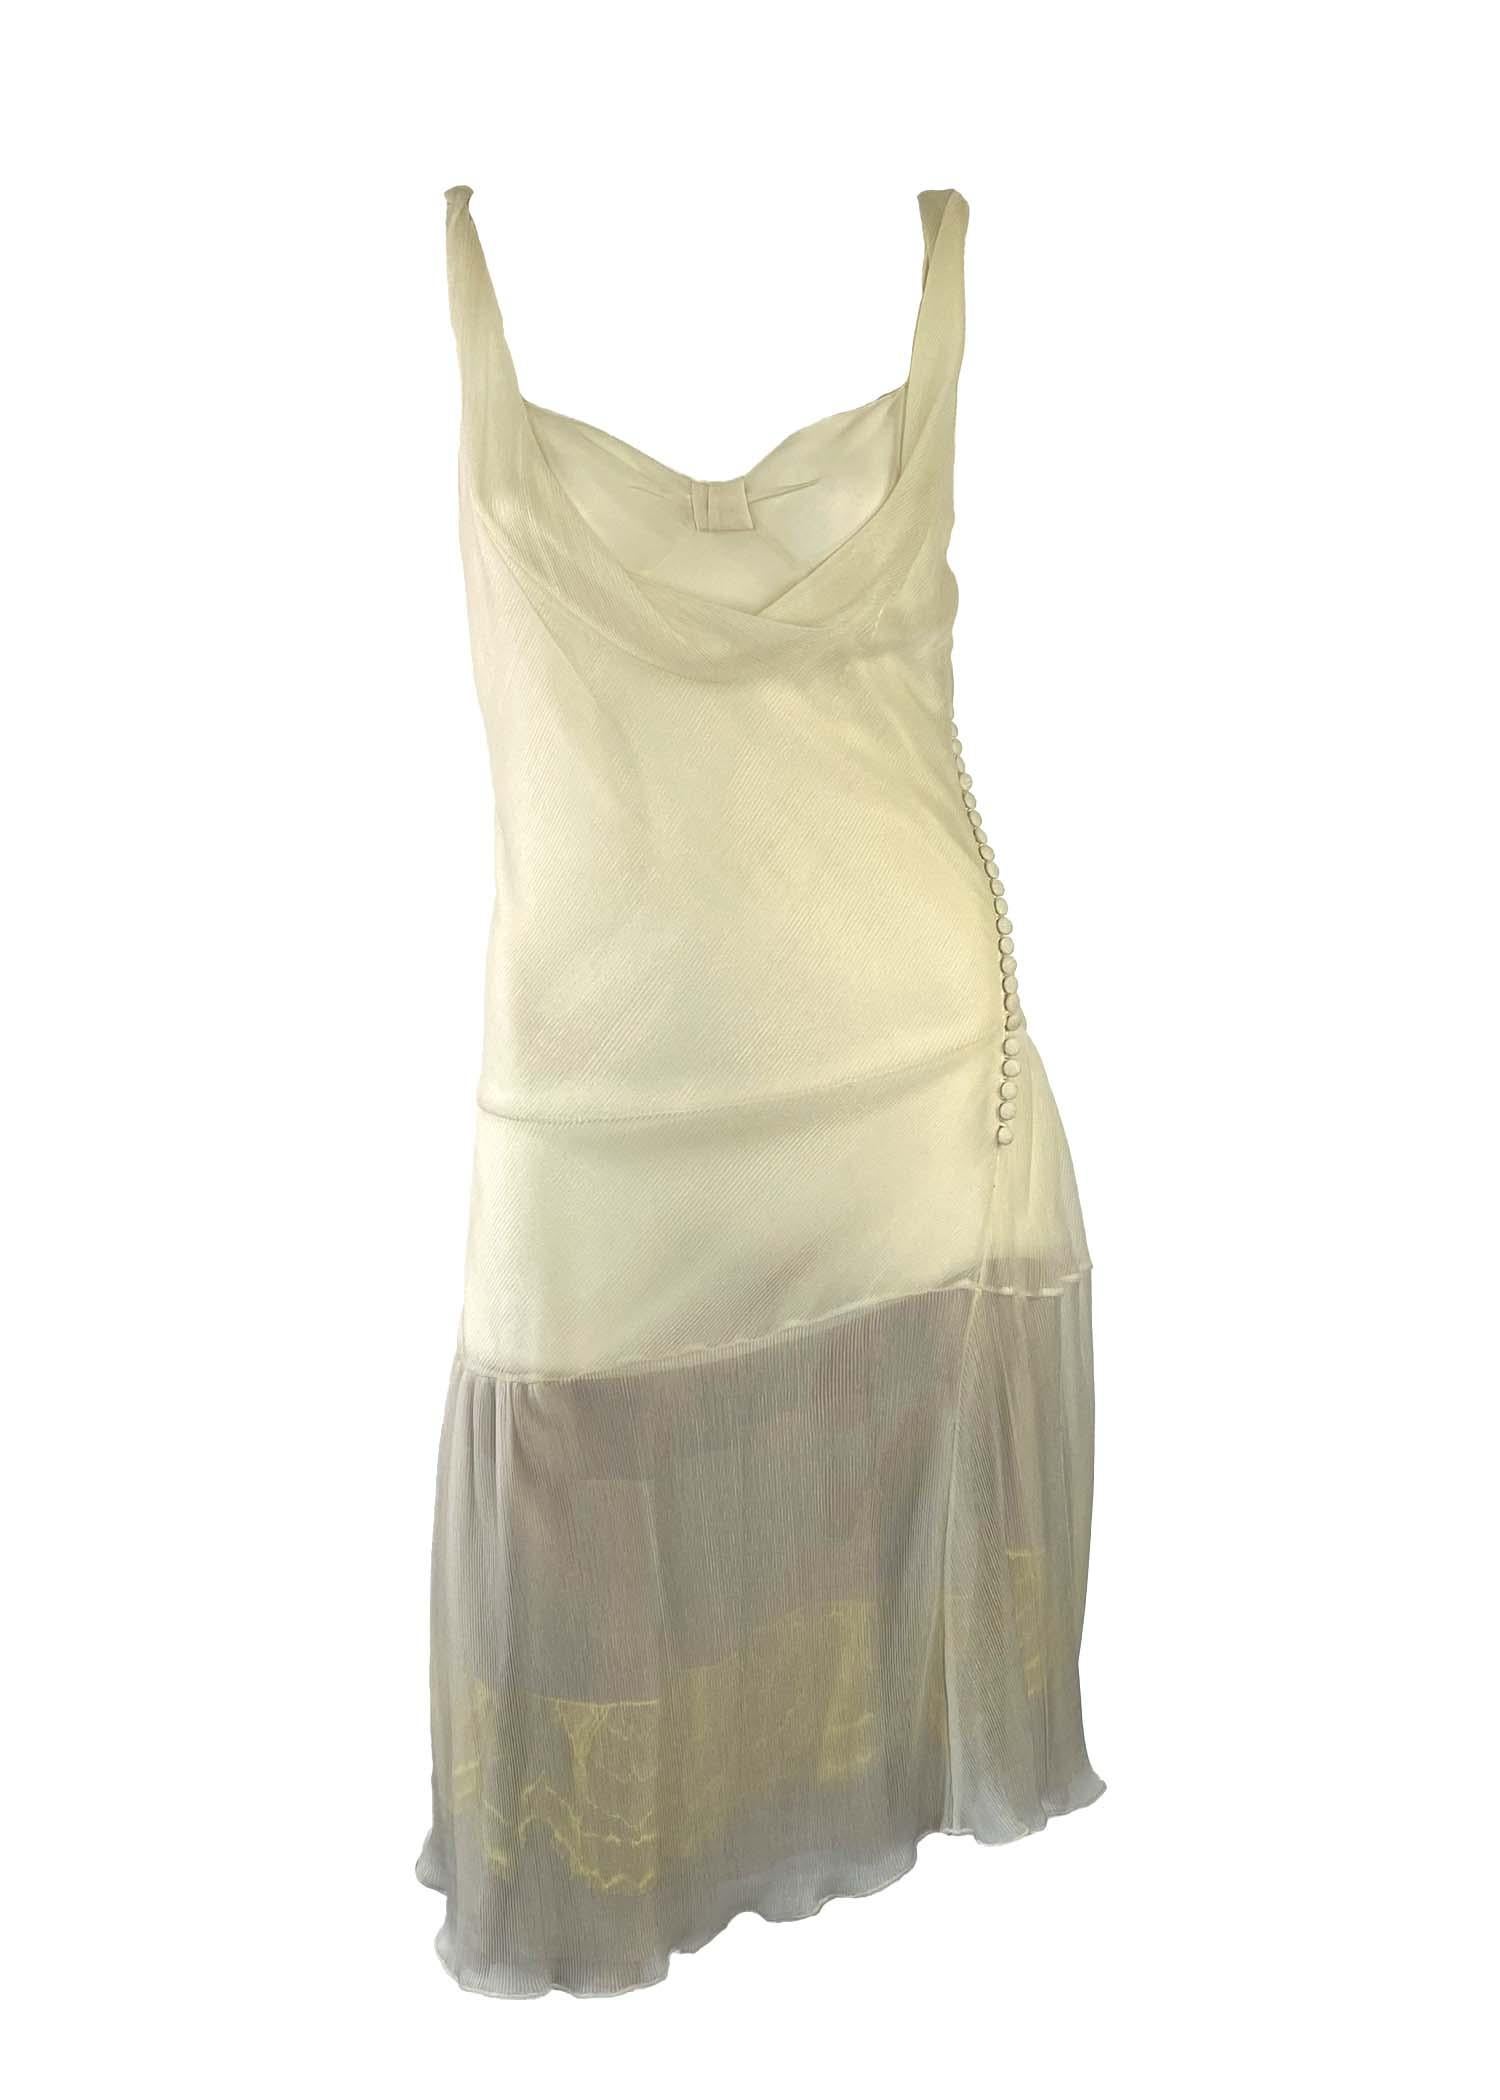 TheRealList presents: a stunning silk chiffon Dior dress, designed by John Galliano. This dress from the Fall/Winter 2006 collection is constructed with ample amounts of sheer silk fabric and is truly an embodiment of Y2K style. The dress features